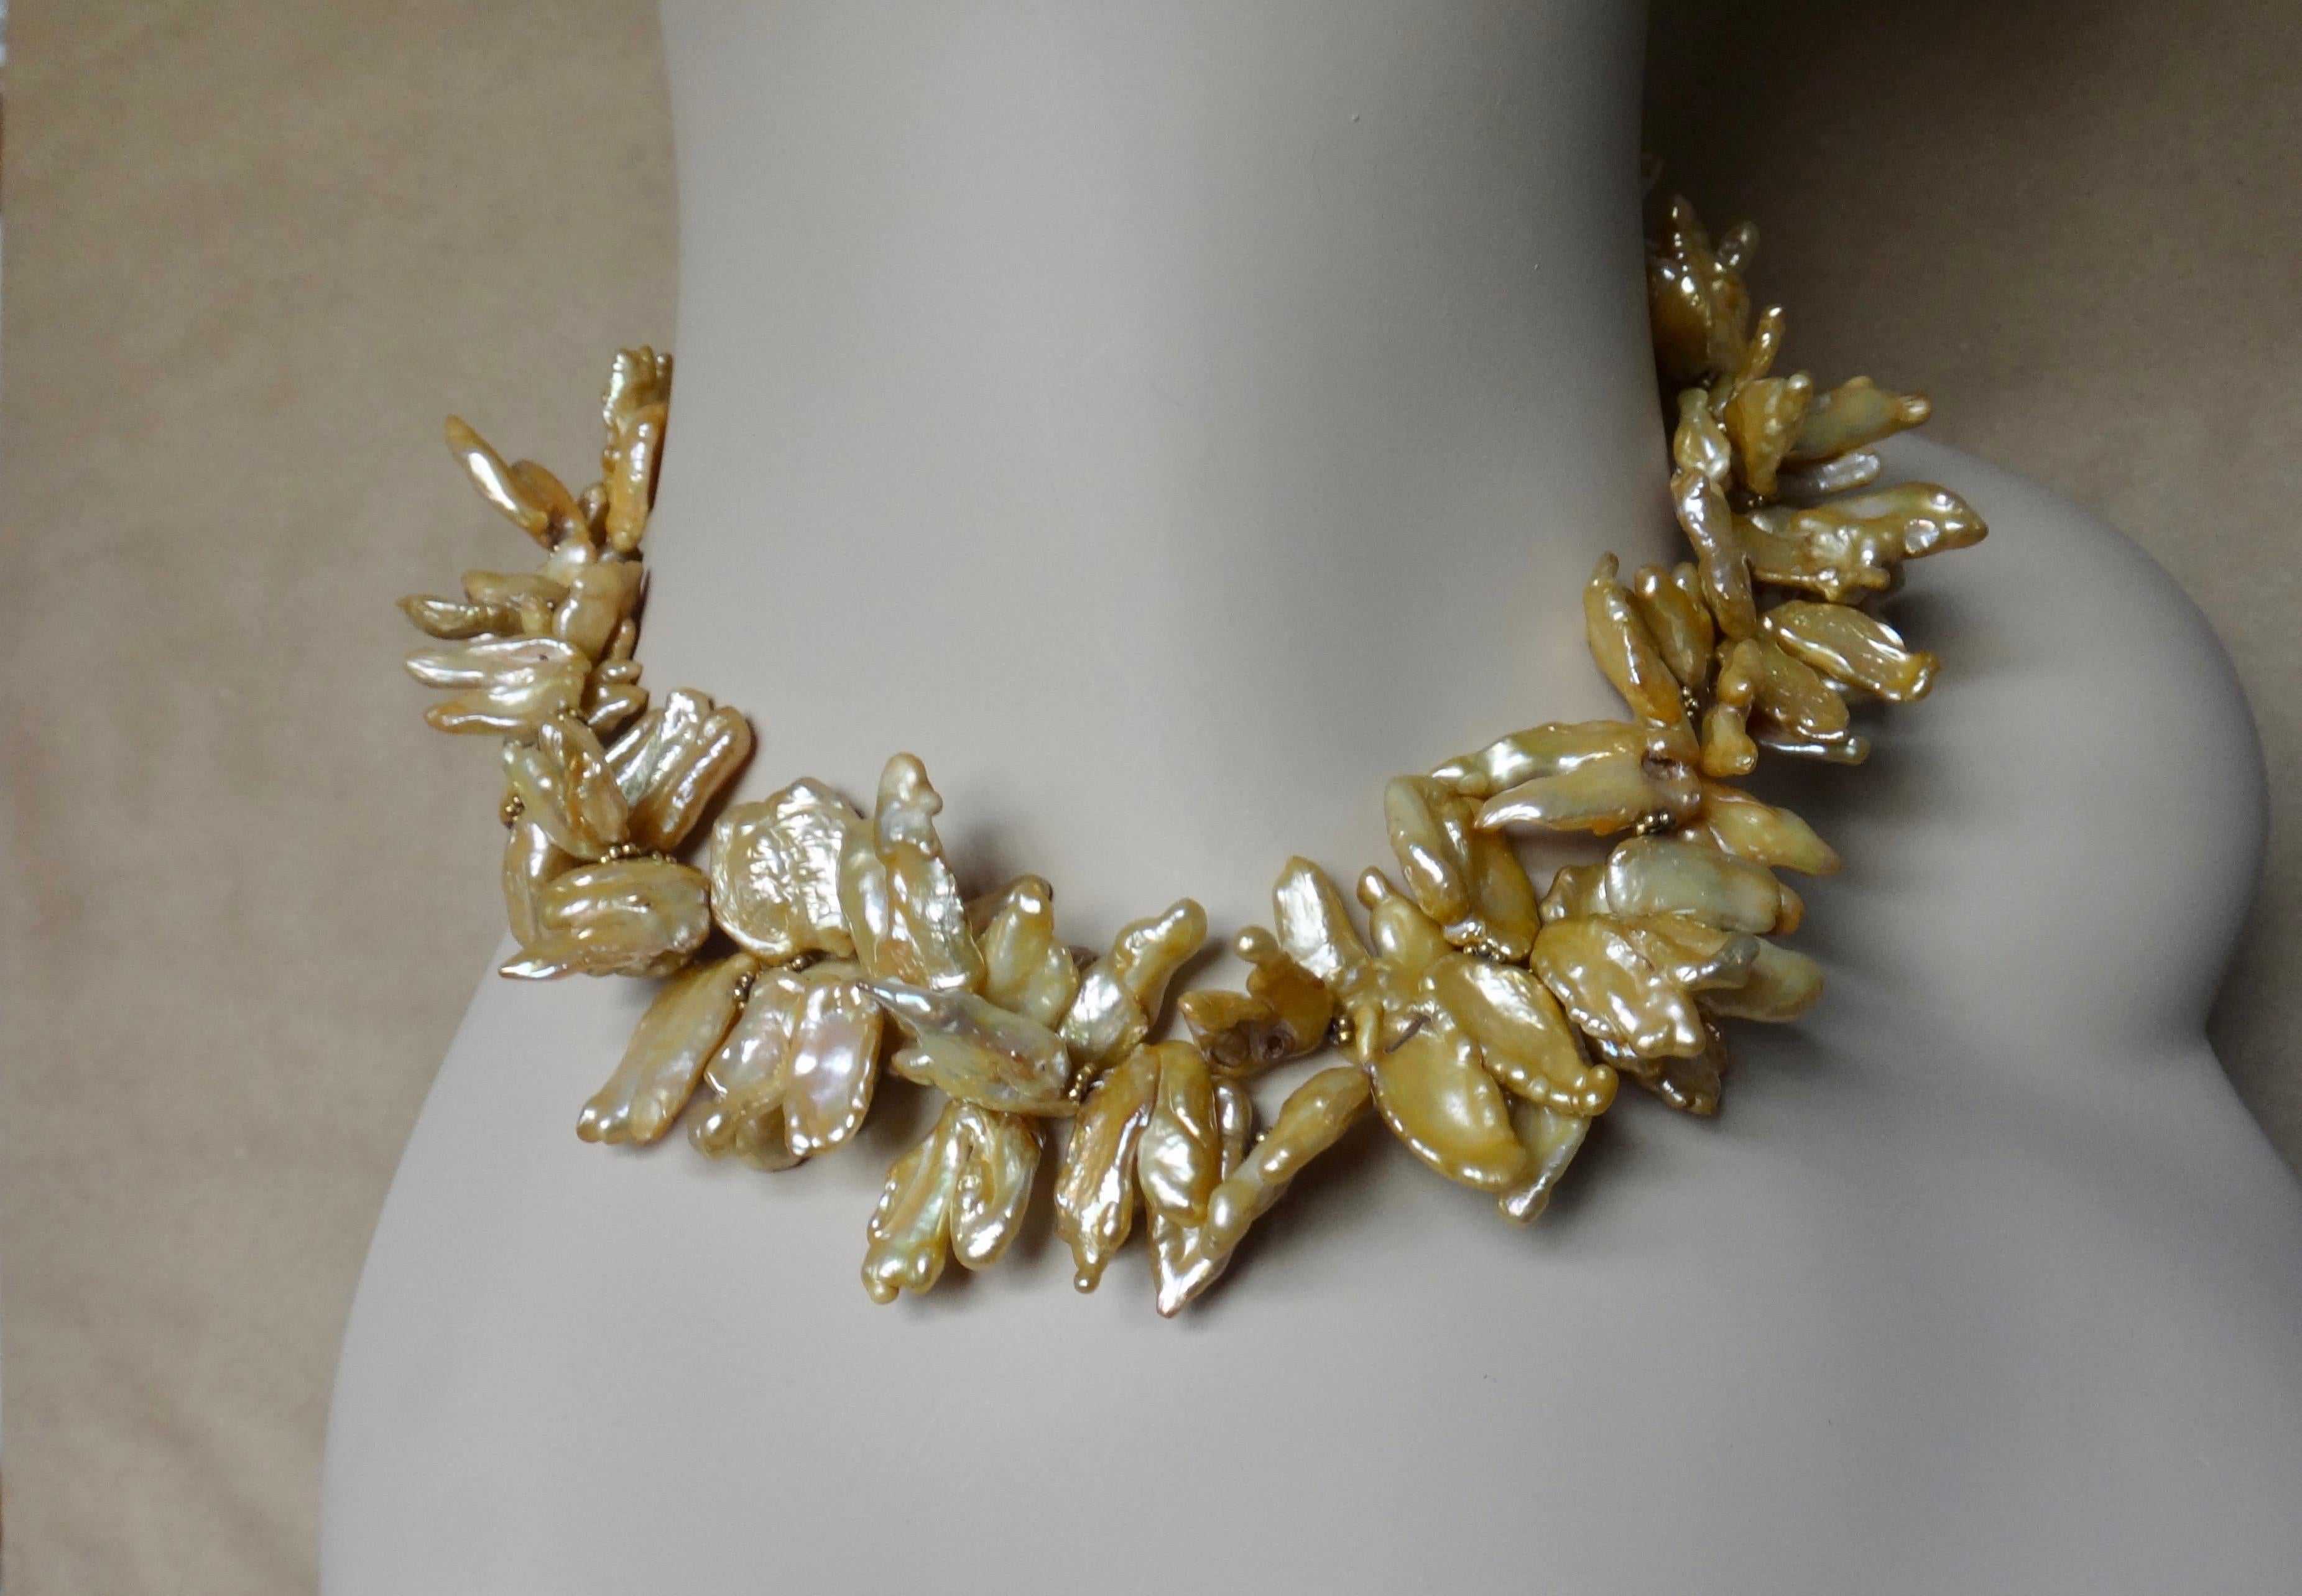 Two strands of highly baroque freshwater pearls in rich colors of khaki, tan and bronze are twisted together to create this stylish torsade necklace.  The unusually colored collection of pearls possess vivid luster and beautiful finish.  There are